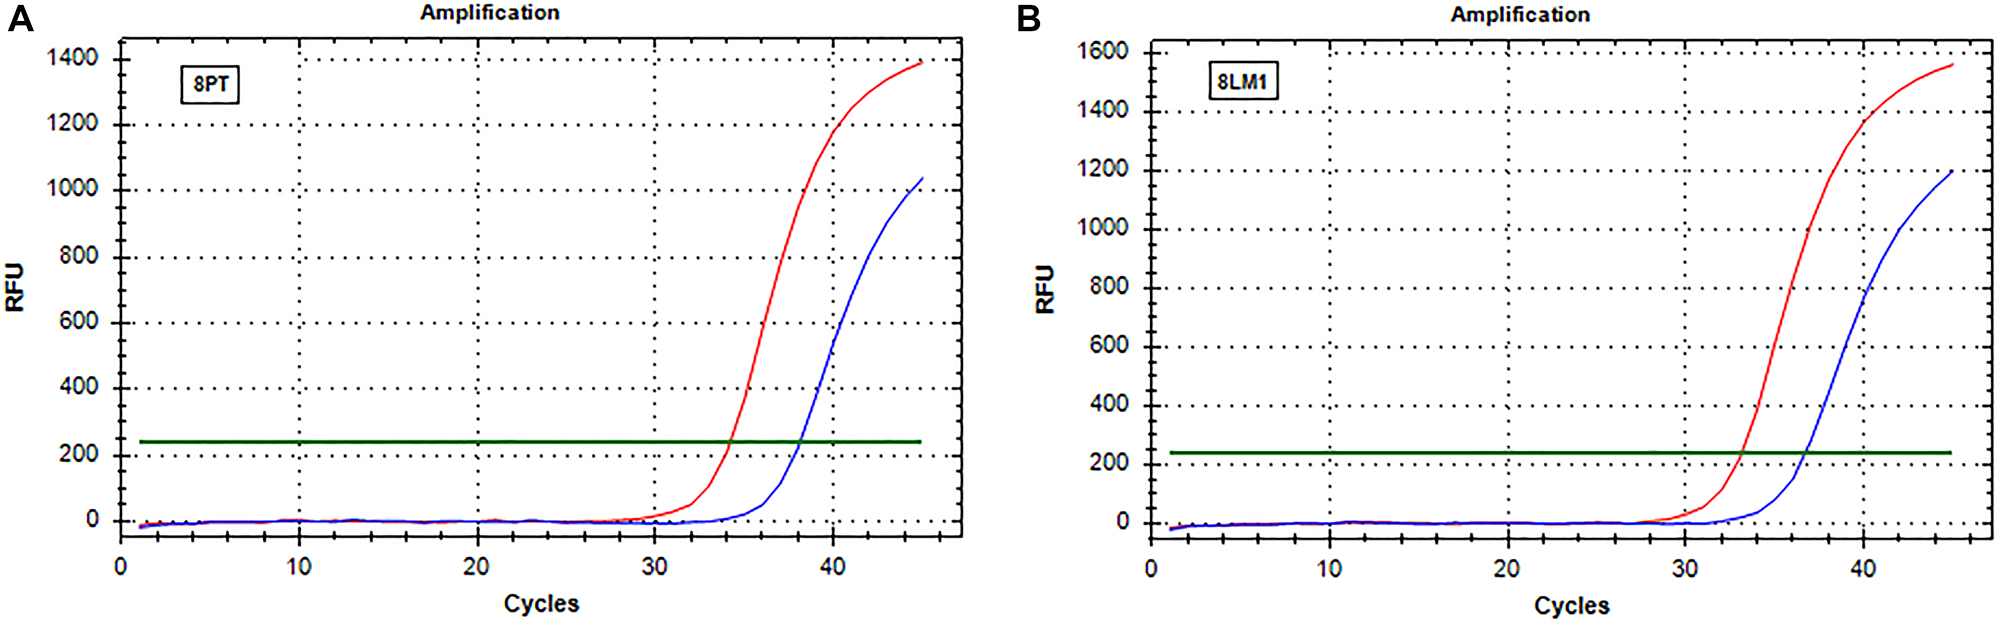 Figure 2: Real-time PCR (SensiScreen™) amplification curves of patient 8 (group 2).